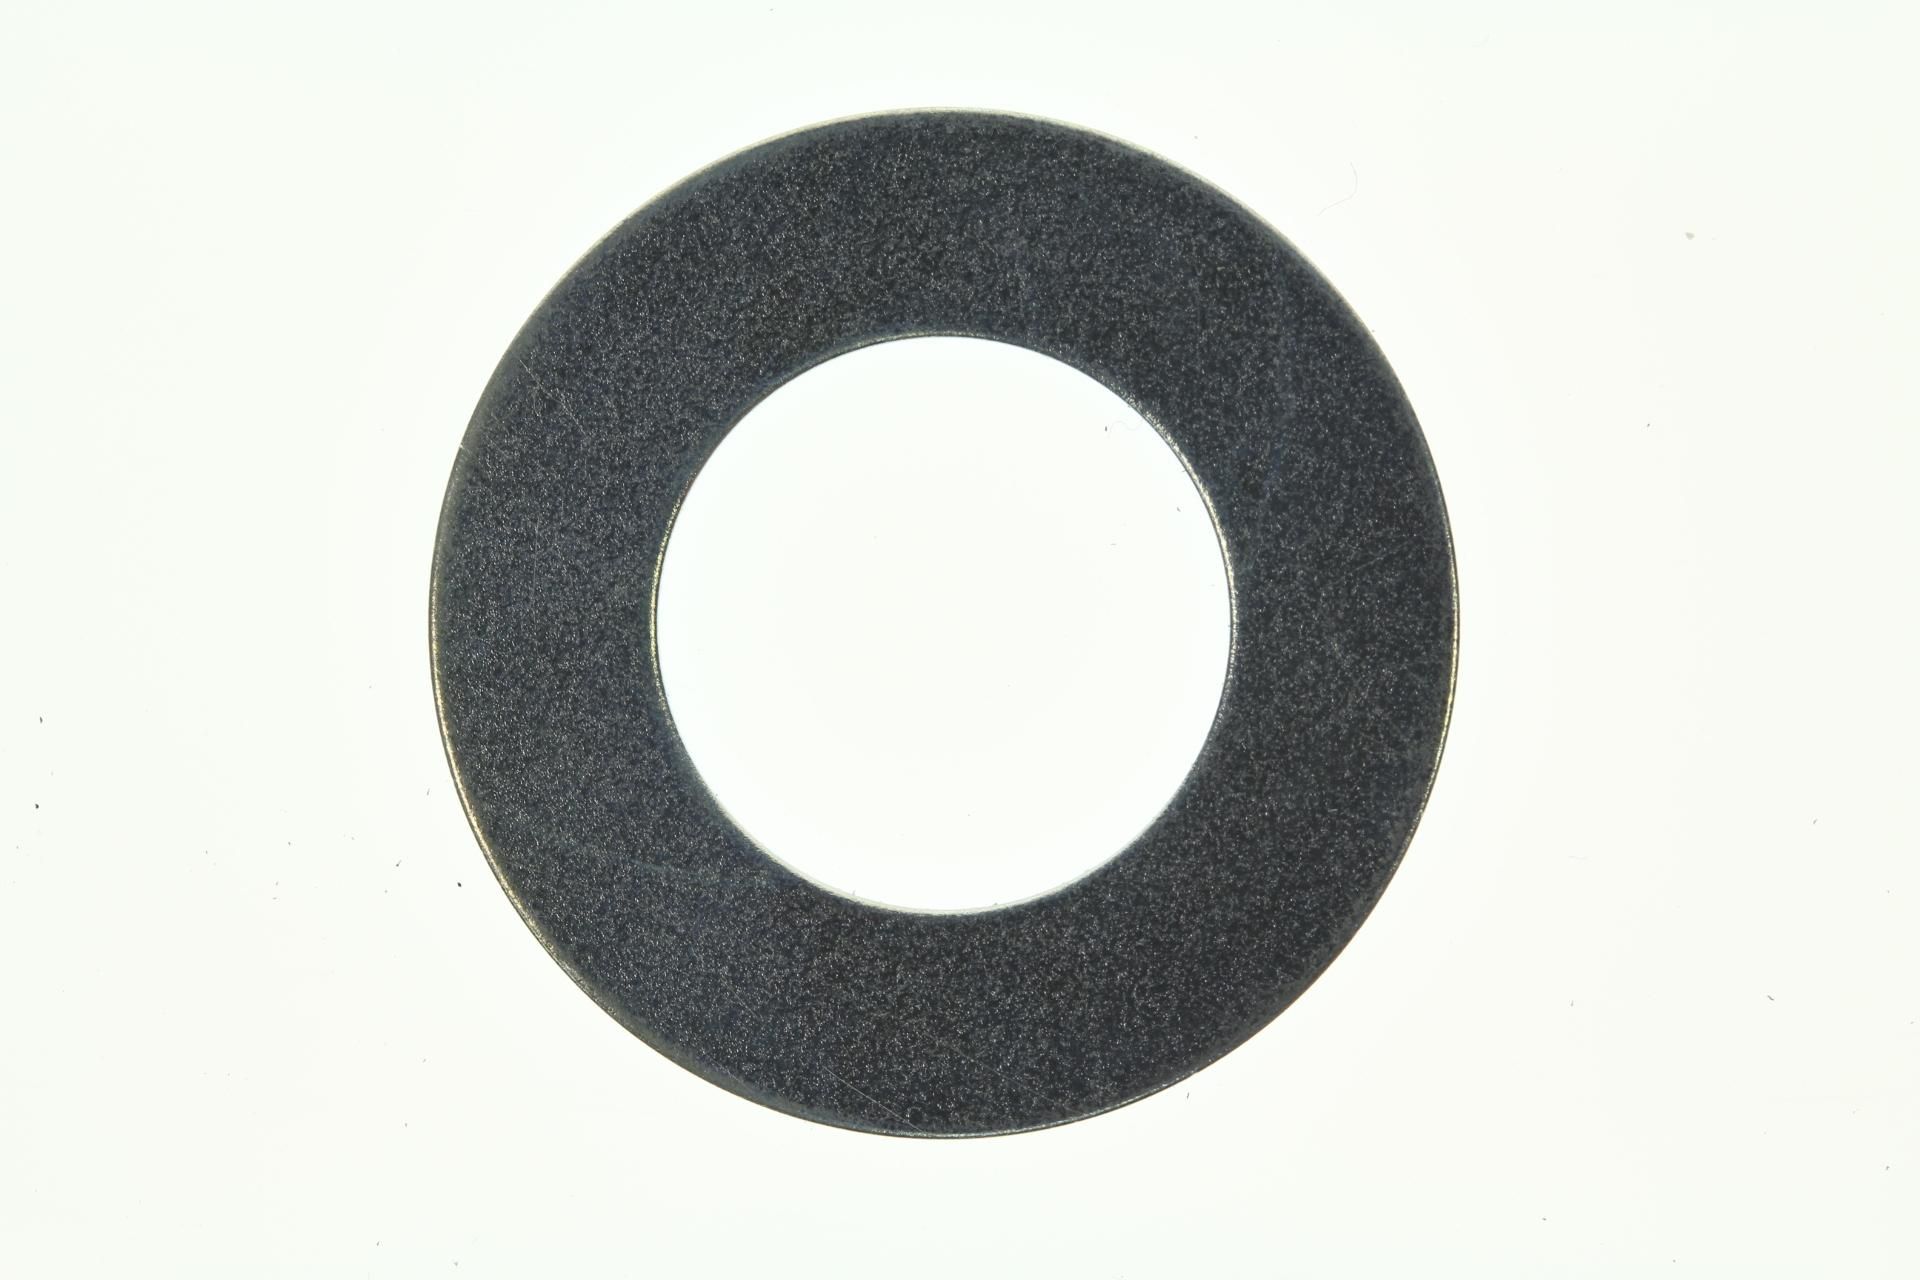 150-25153-00-00 Superseded by 90201-14217-00 - WASHER,PLATE